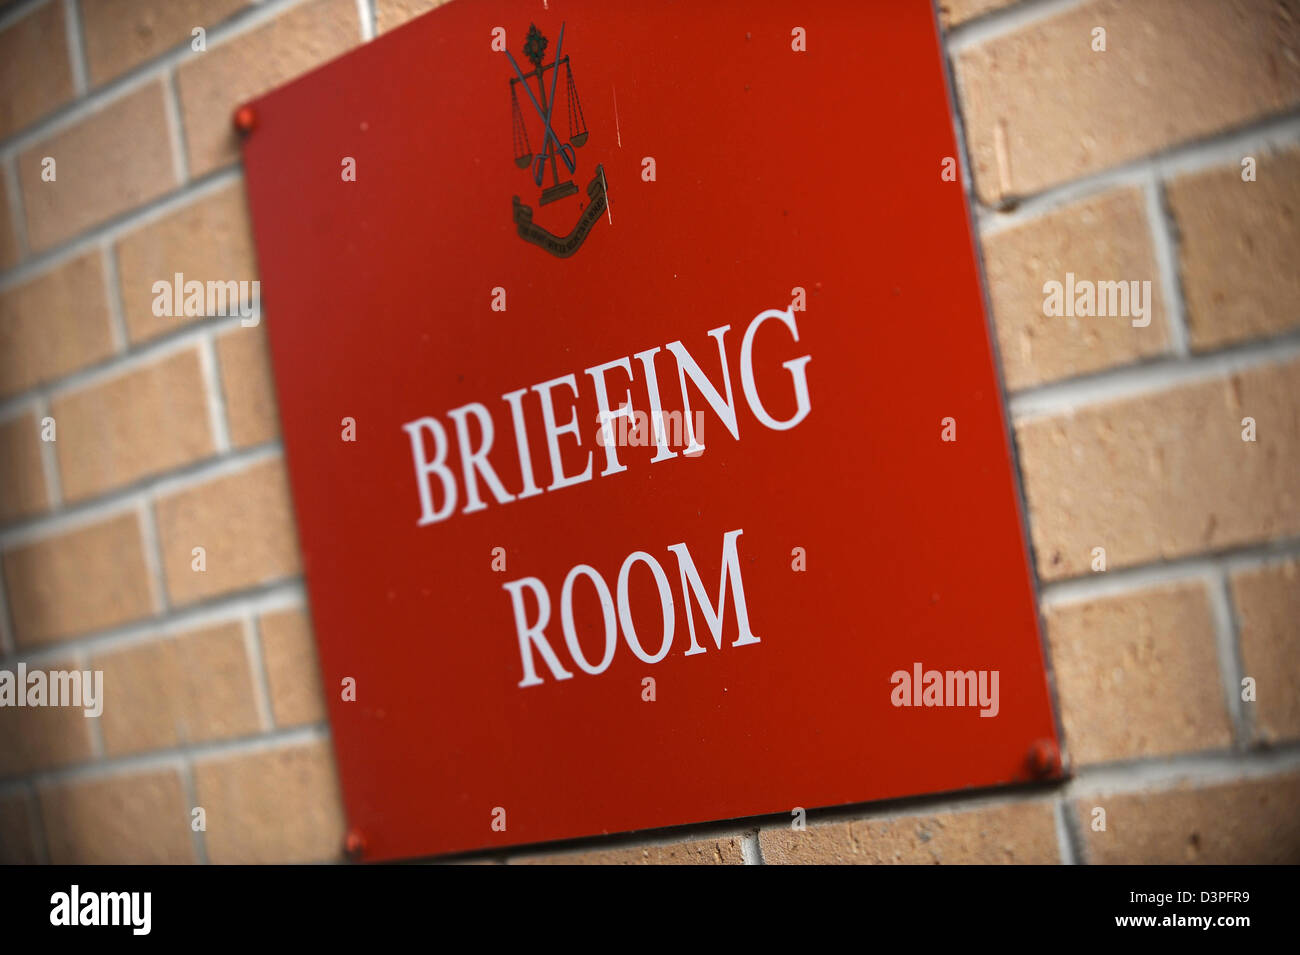 Briefing Room sign at the Army Officer Selection Board at Westbury, Wiltshire UK Stock Photo